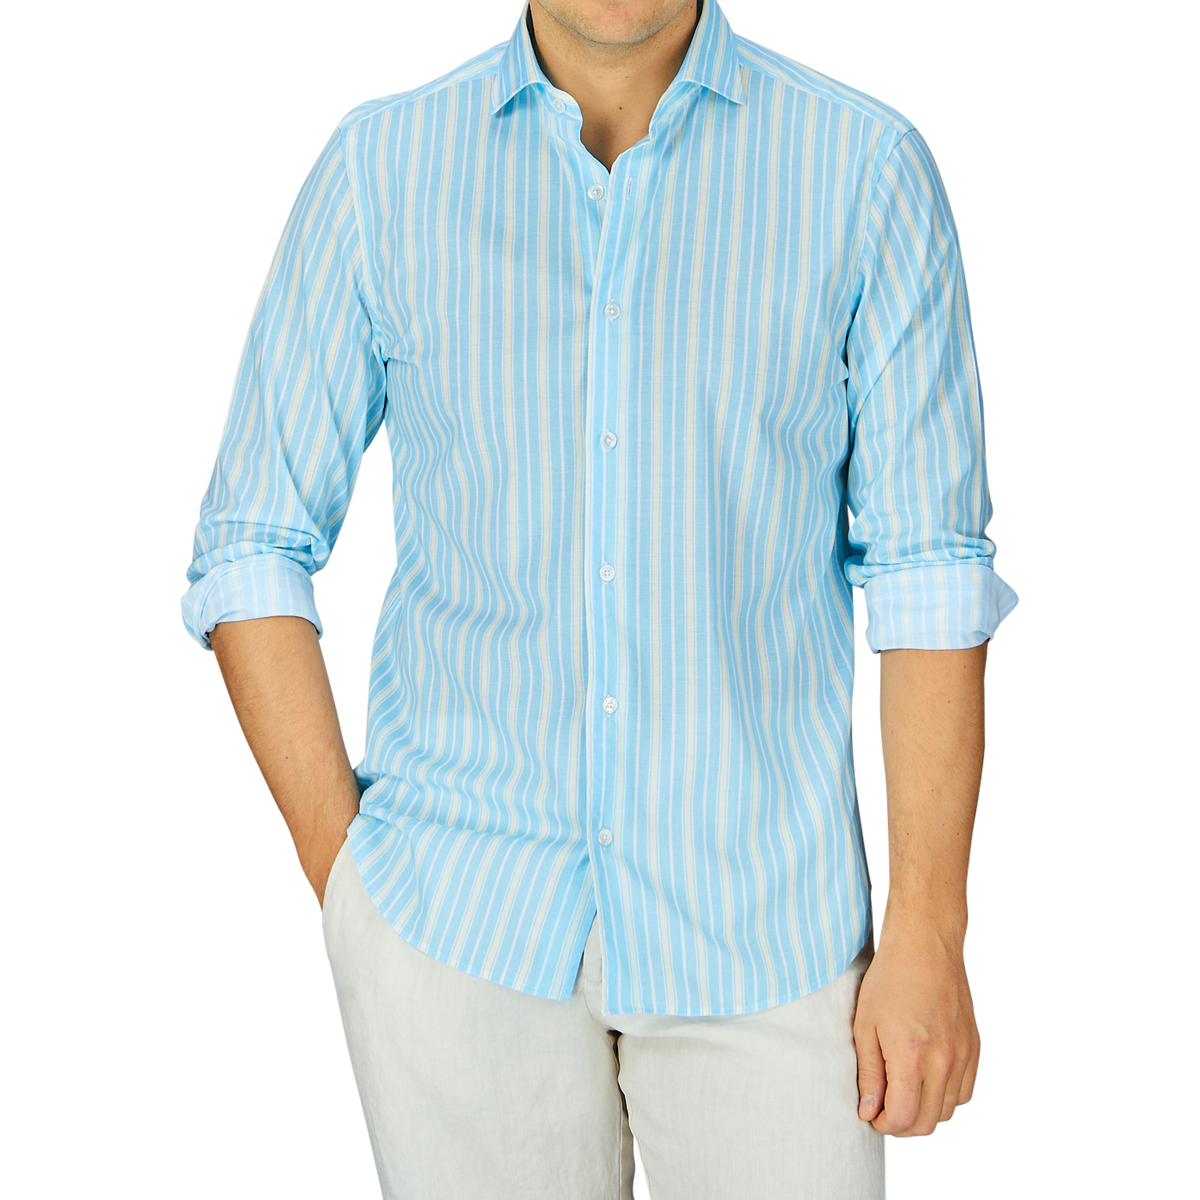 Man wearing a Fedeli Sky Blue Yellow Striped Cotton Beach Shirt, with blue and white stripes and light-colored pants against a gray background.